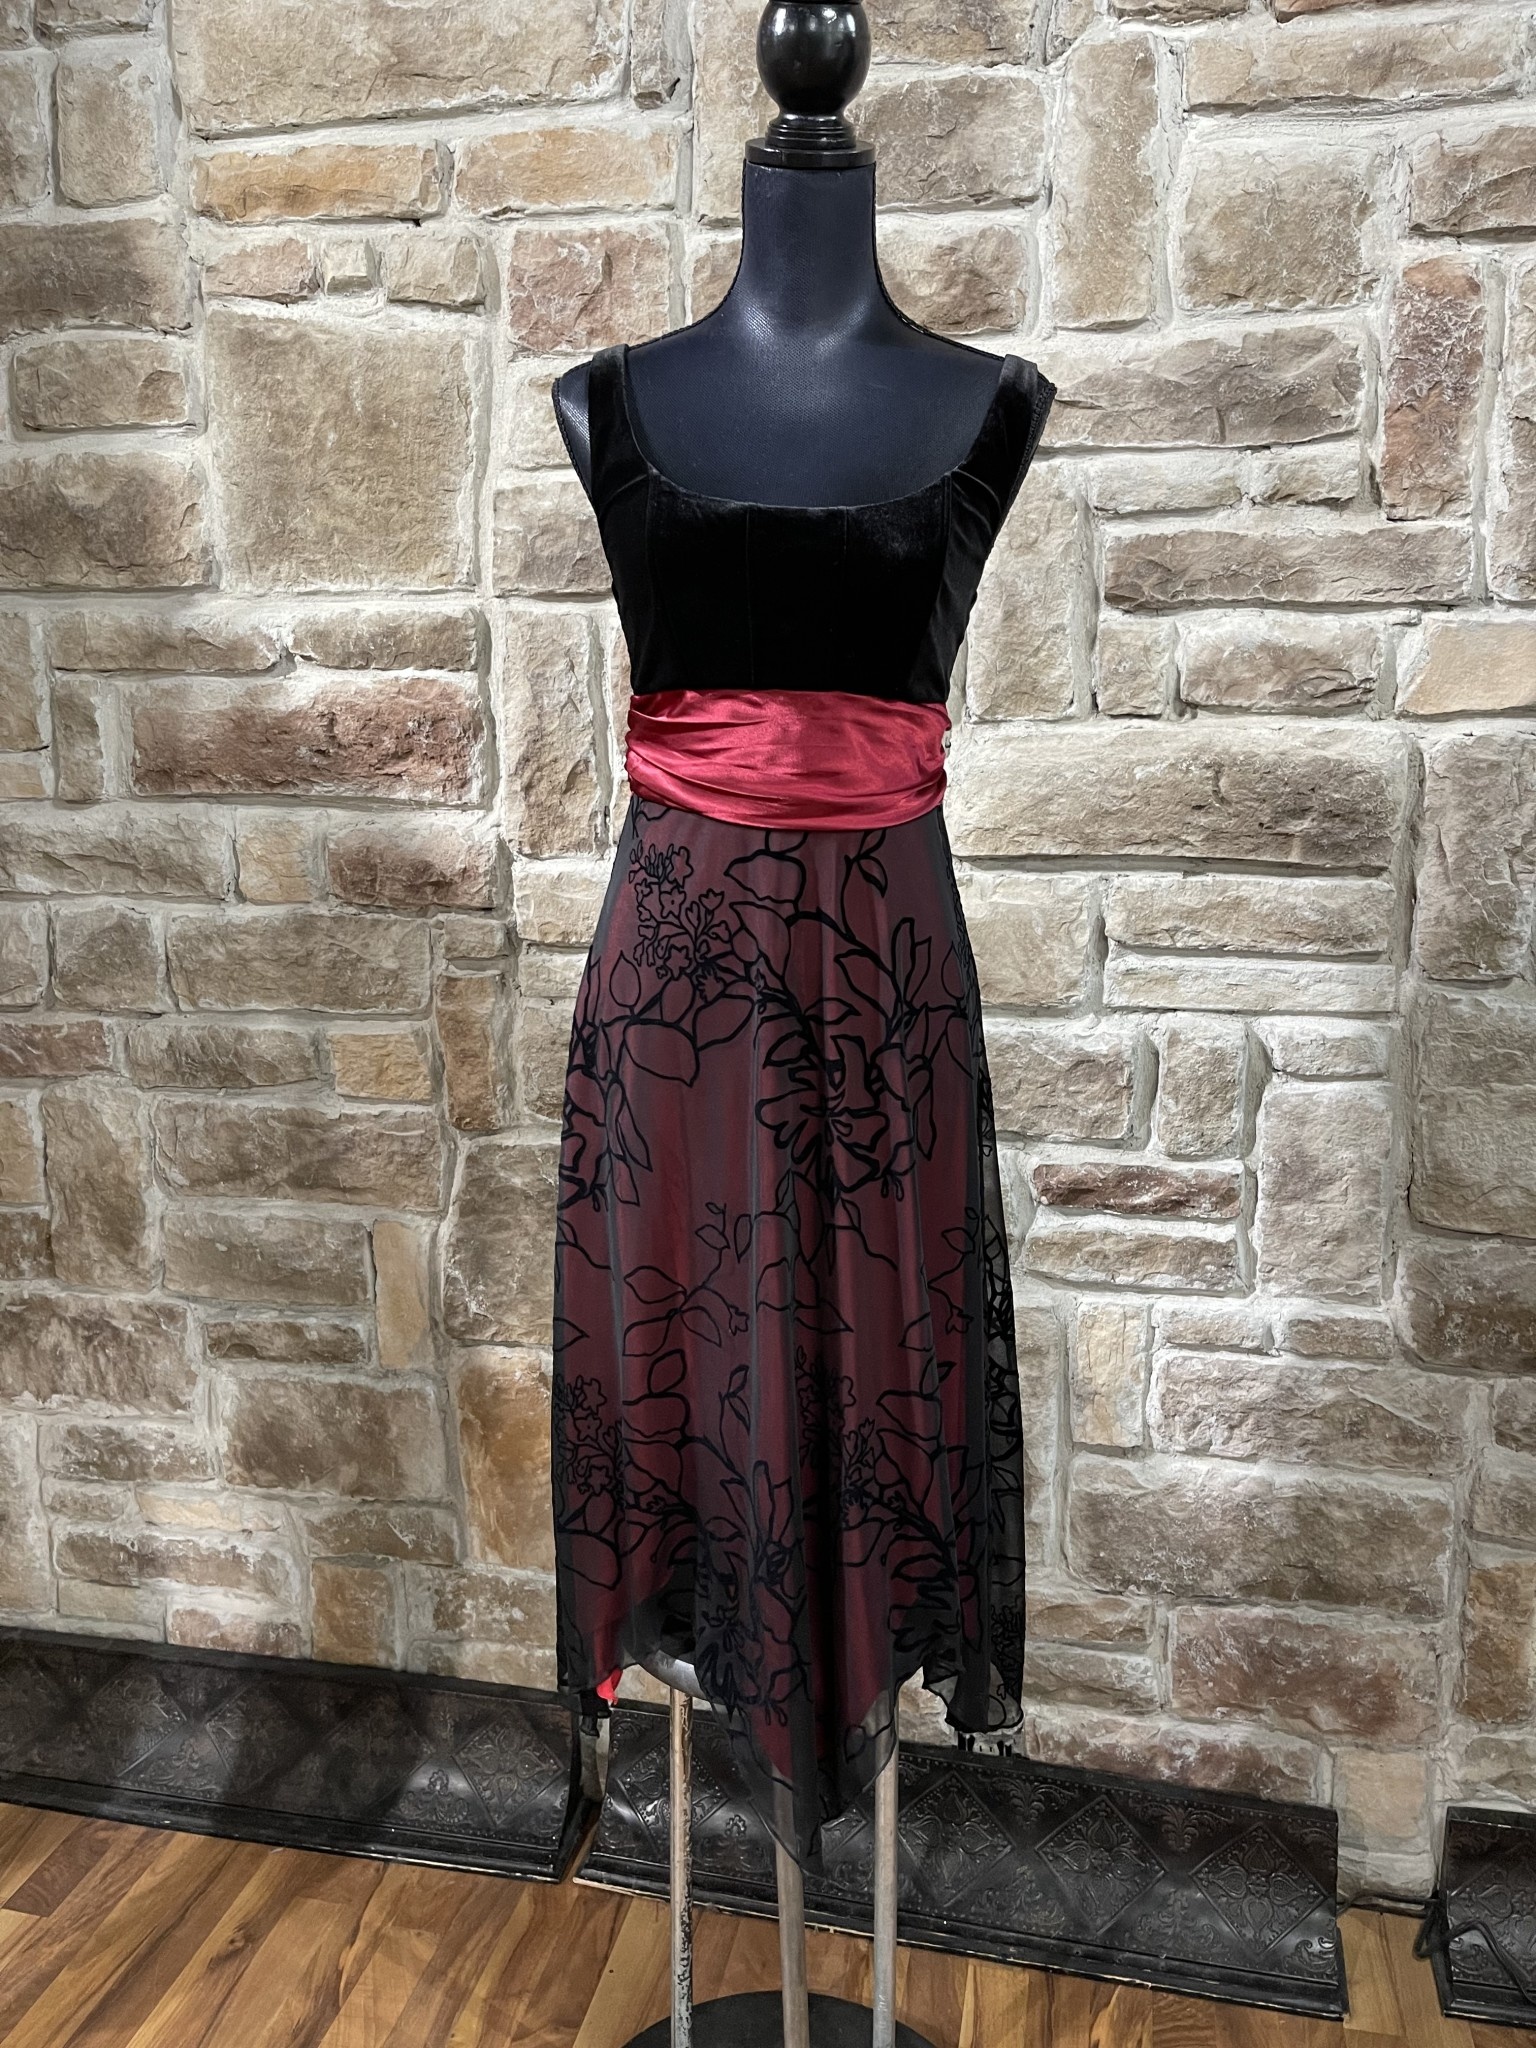 Black & Red Dress with Velvet Top, Red Sash and Black Floral Overlay Skirt,  Size S